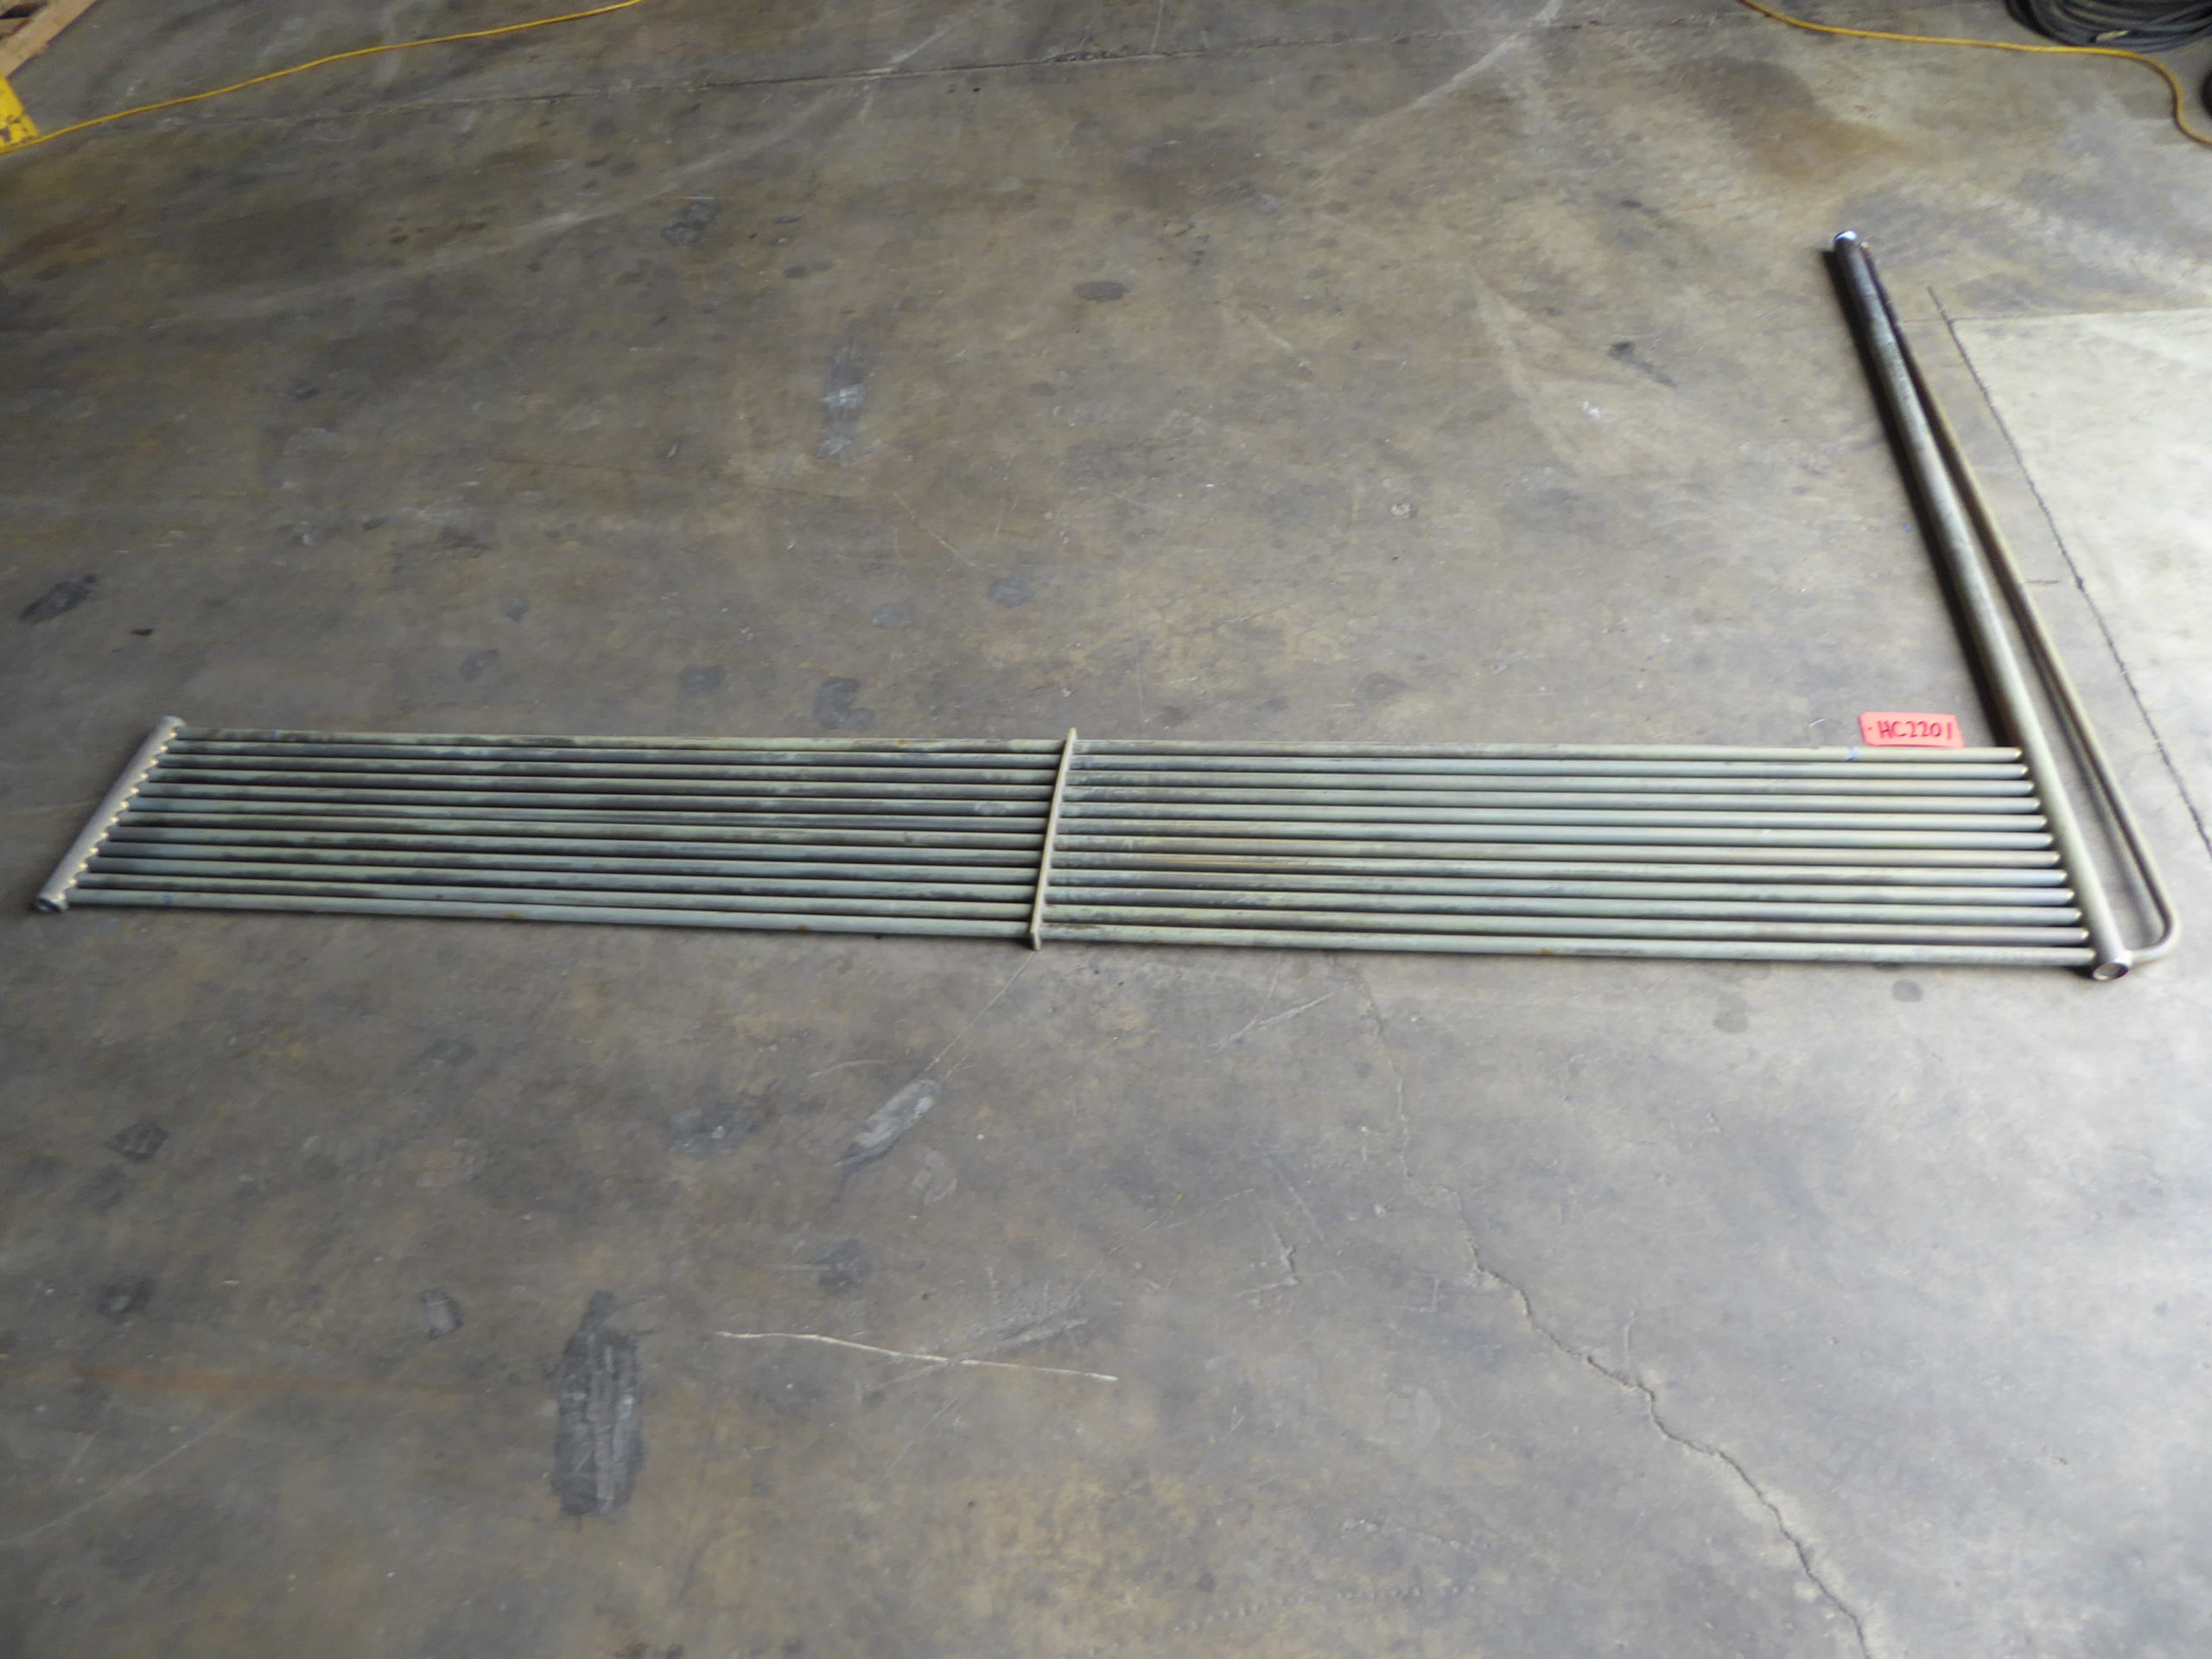 Used Heating Cooling Coil - Titanium 67"L x 144"W x 18"H Grid Heating Coil-Heating Cooling Coils